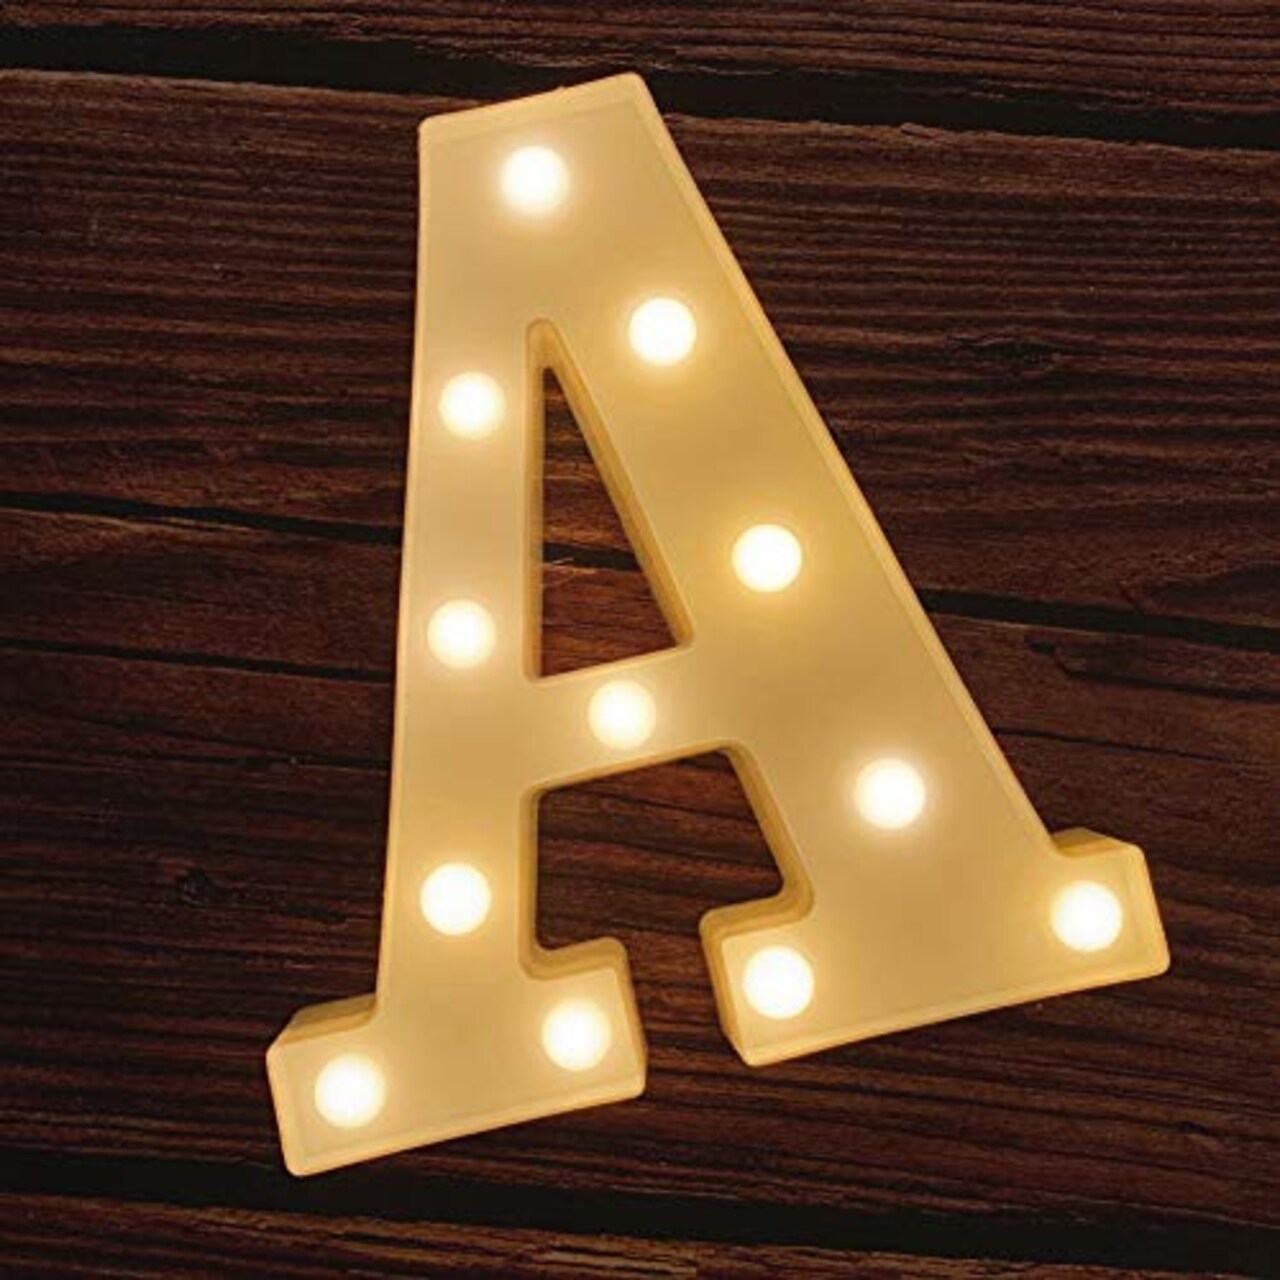 MUMUXI Marquee Light Up Letters, Large Light Up Numbers, Battery Powered  and Bright with Every Letter of the Alphabet, For Wedding, Birthday,  Party, Celebration, Christmas or Home Decoration (A)